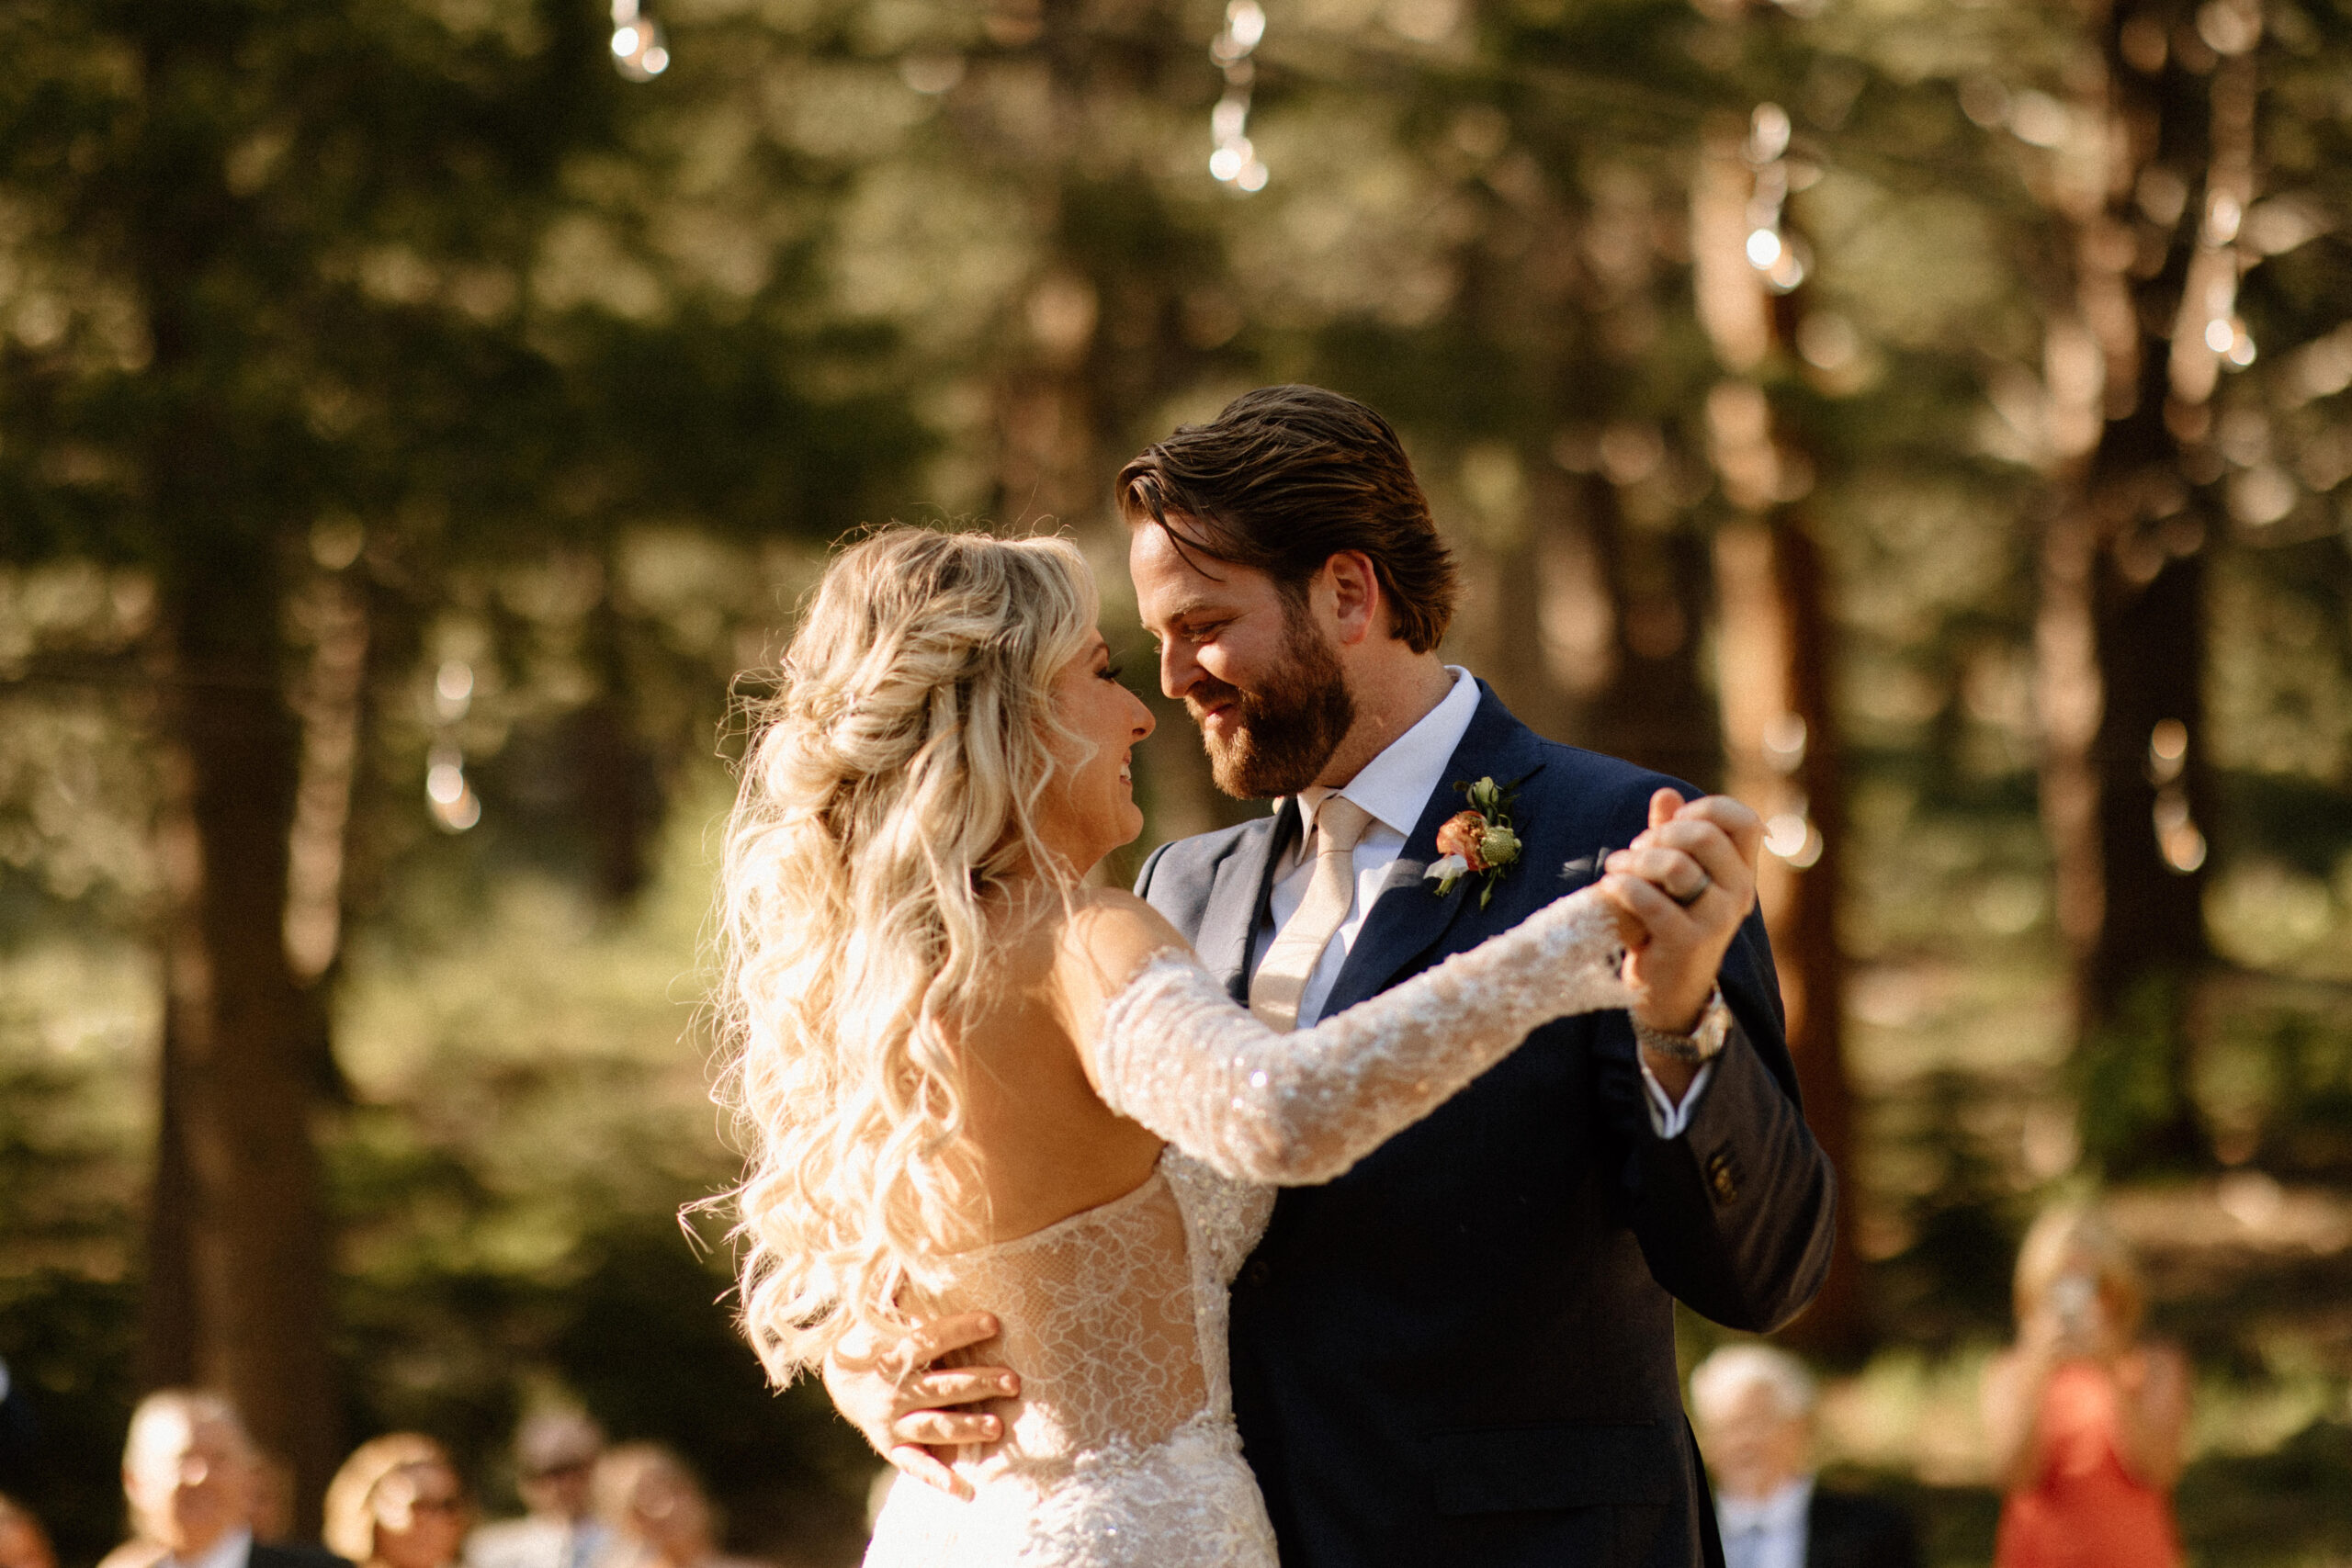 bride and groom share a first dance together while their guests look on